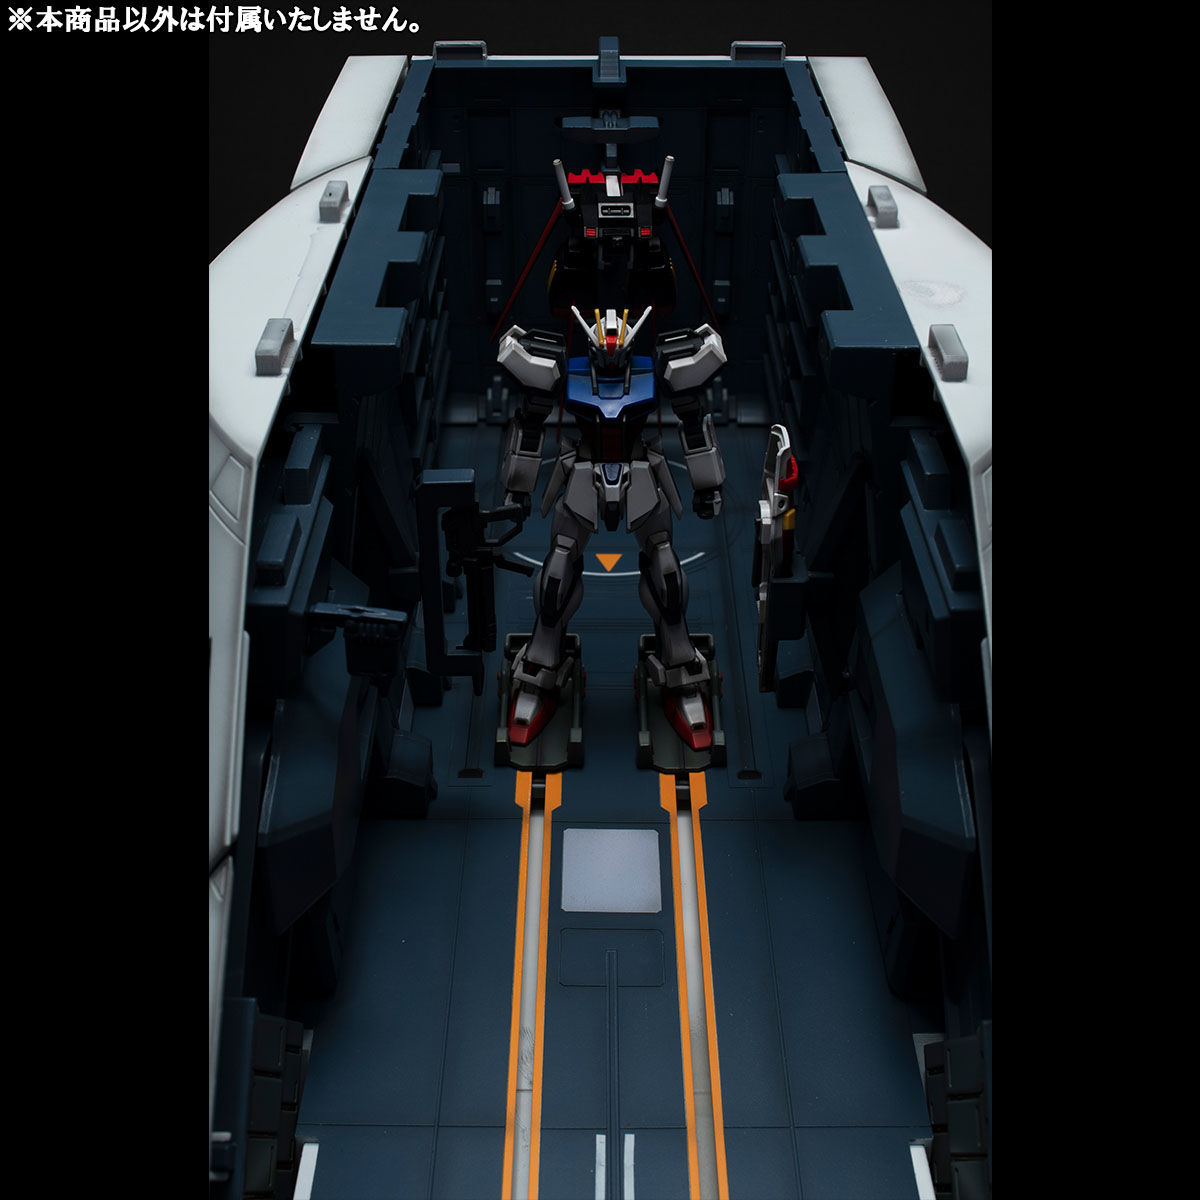 REALISTIC MODEL SERIES MOBILE SUIT GUNDAM SEED ARCHANGEL CATAPULT DECK FOR 1/144 HGUC